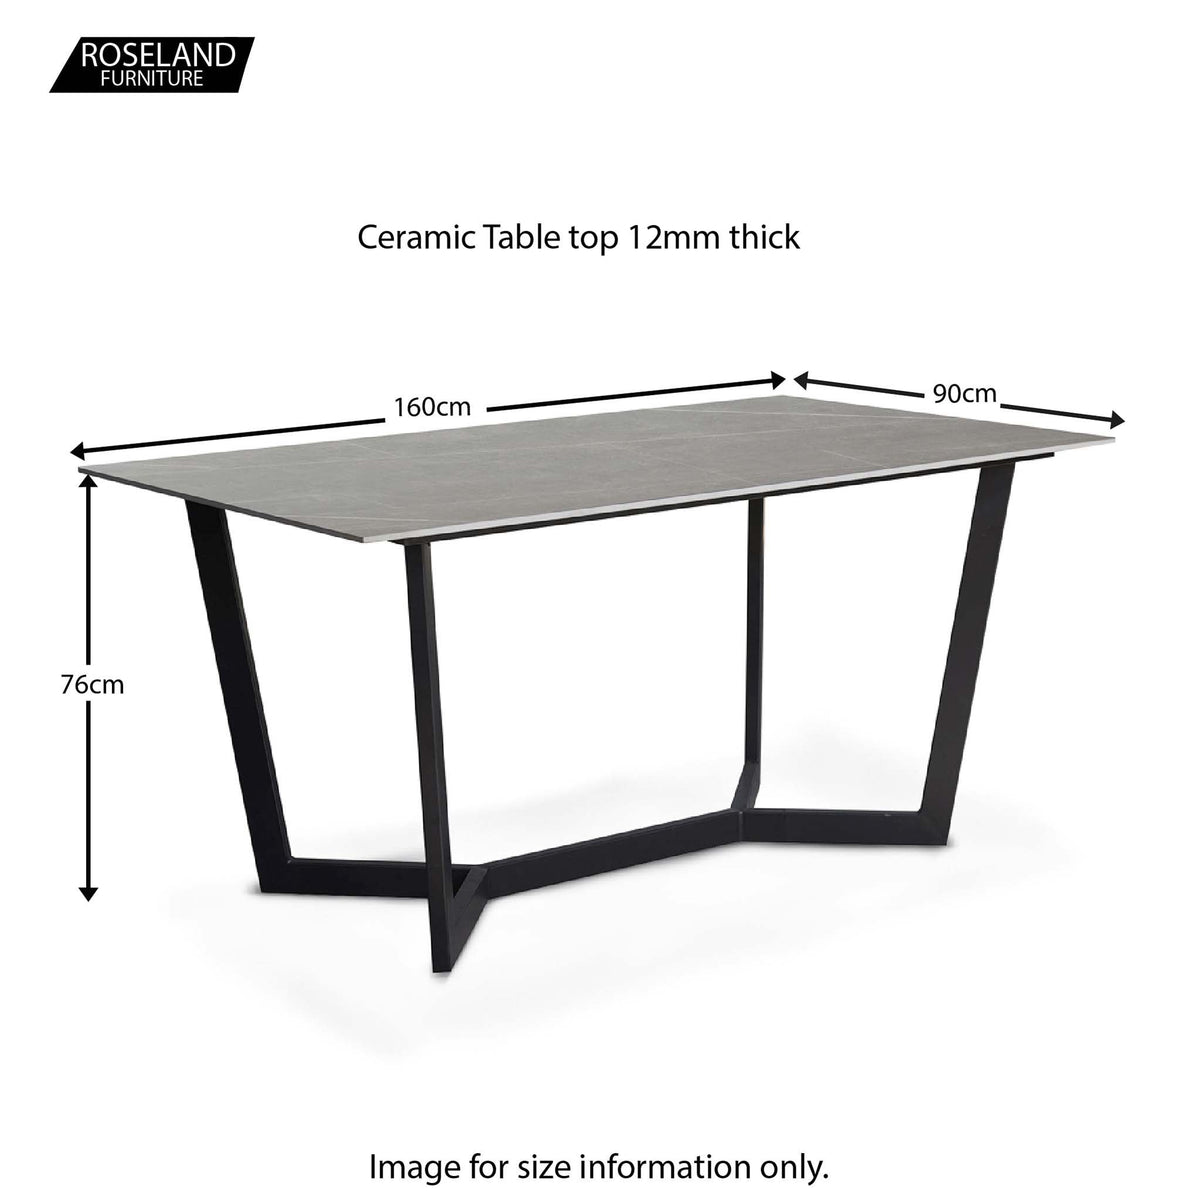 Harley 160cm Ceramic Dining Table - Size Guide